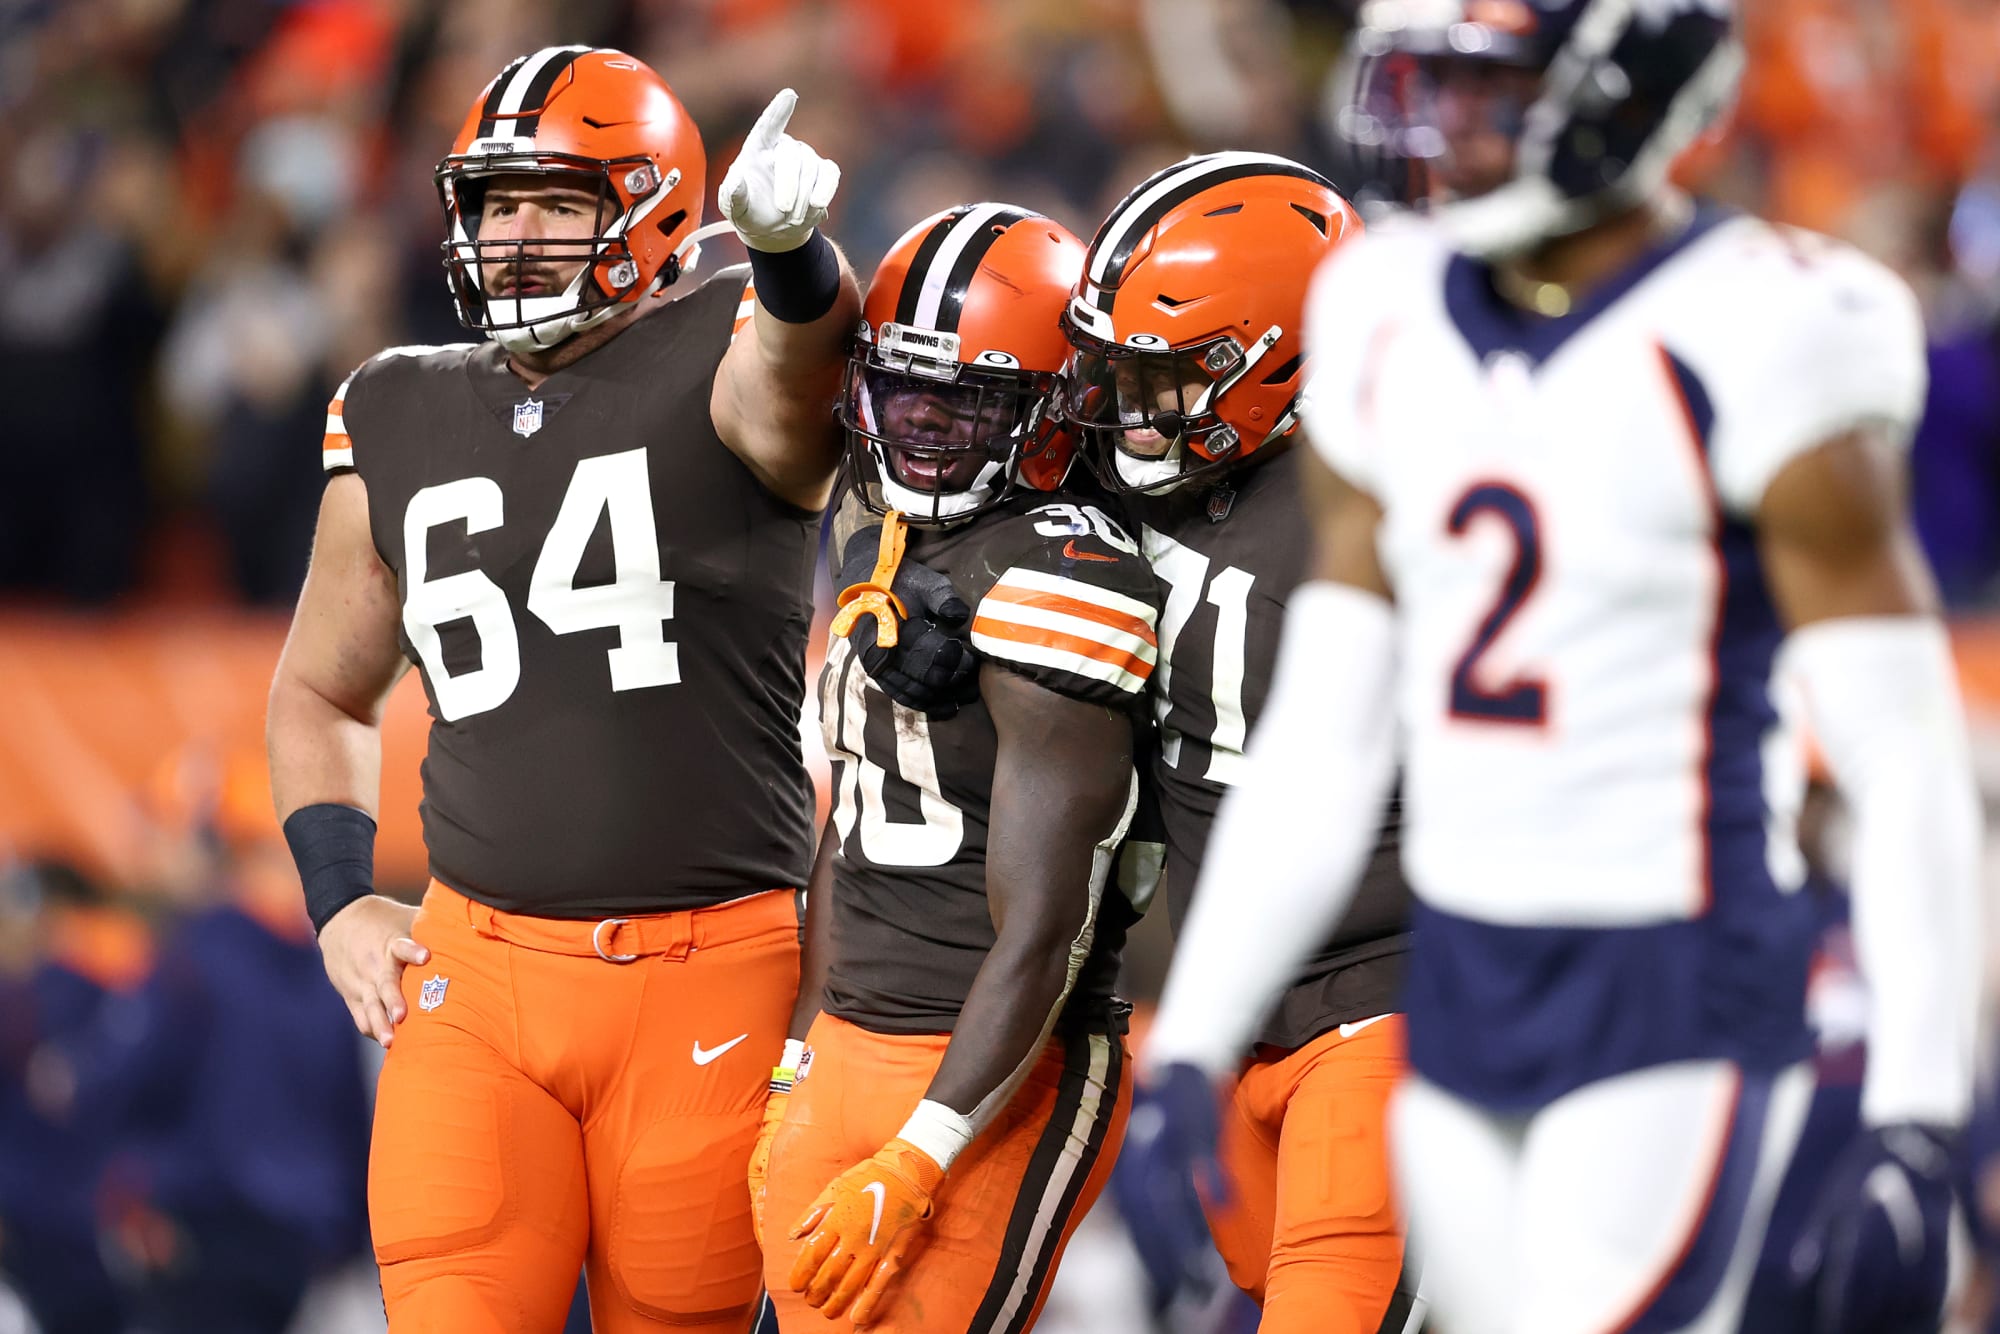 The Browns have 4 Pro Bowl alternates and they are wild